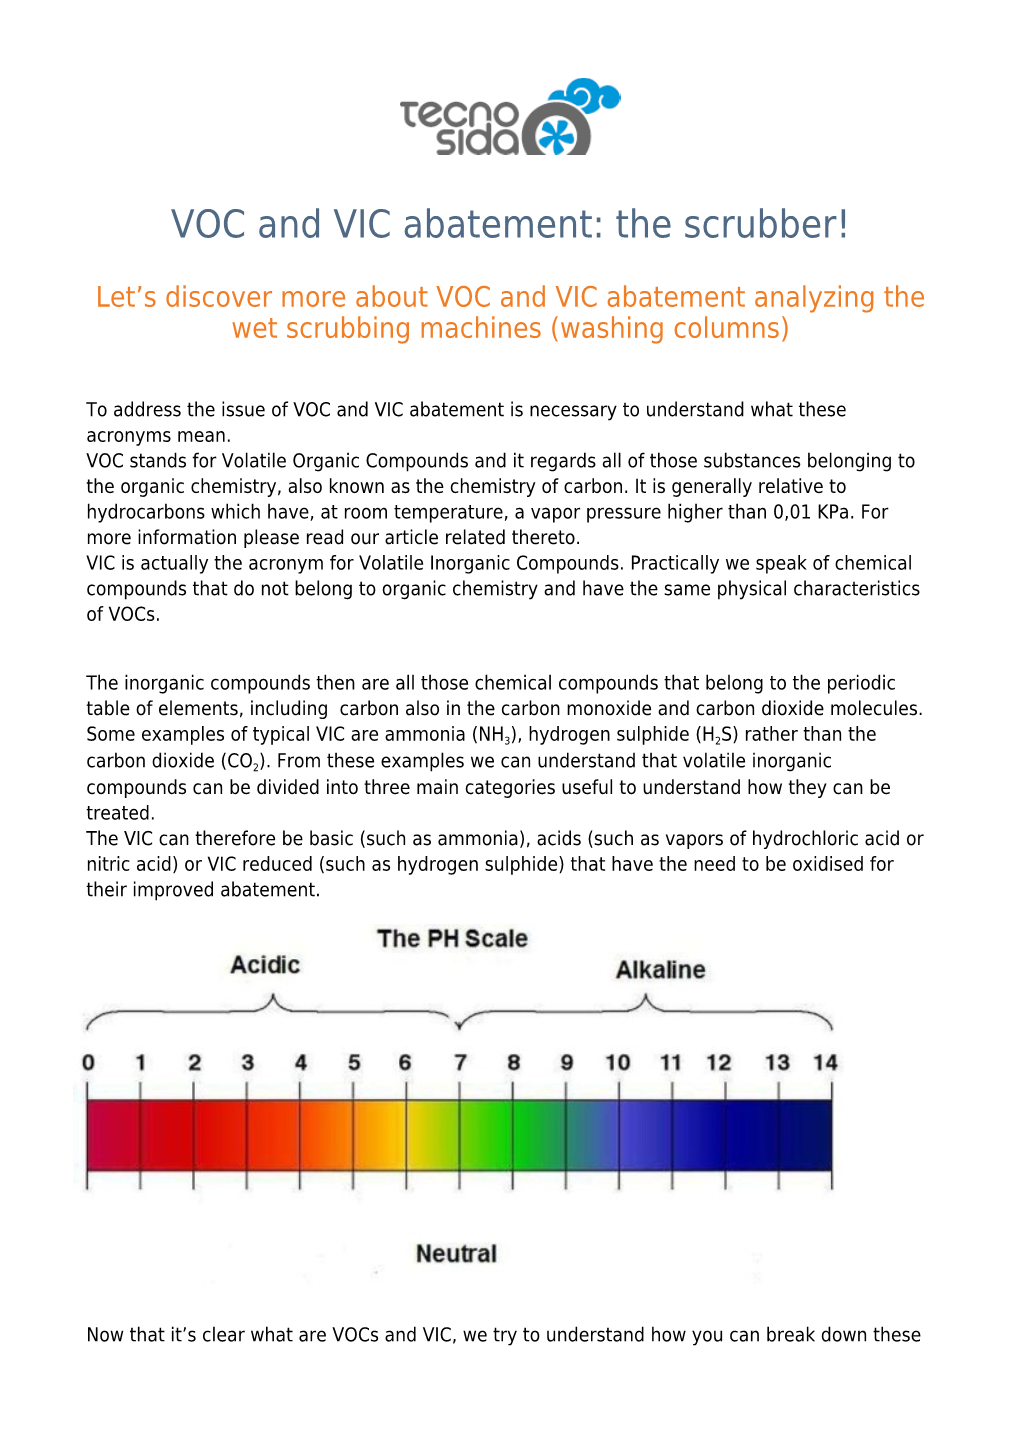 VOC and VIC Abatement: the Scrubber!